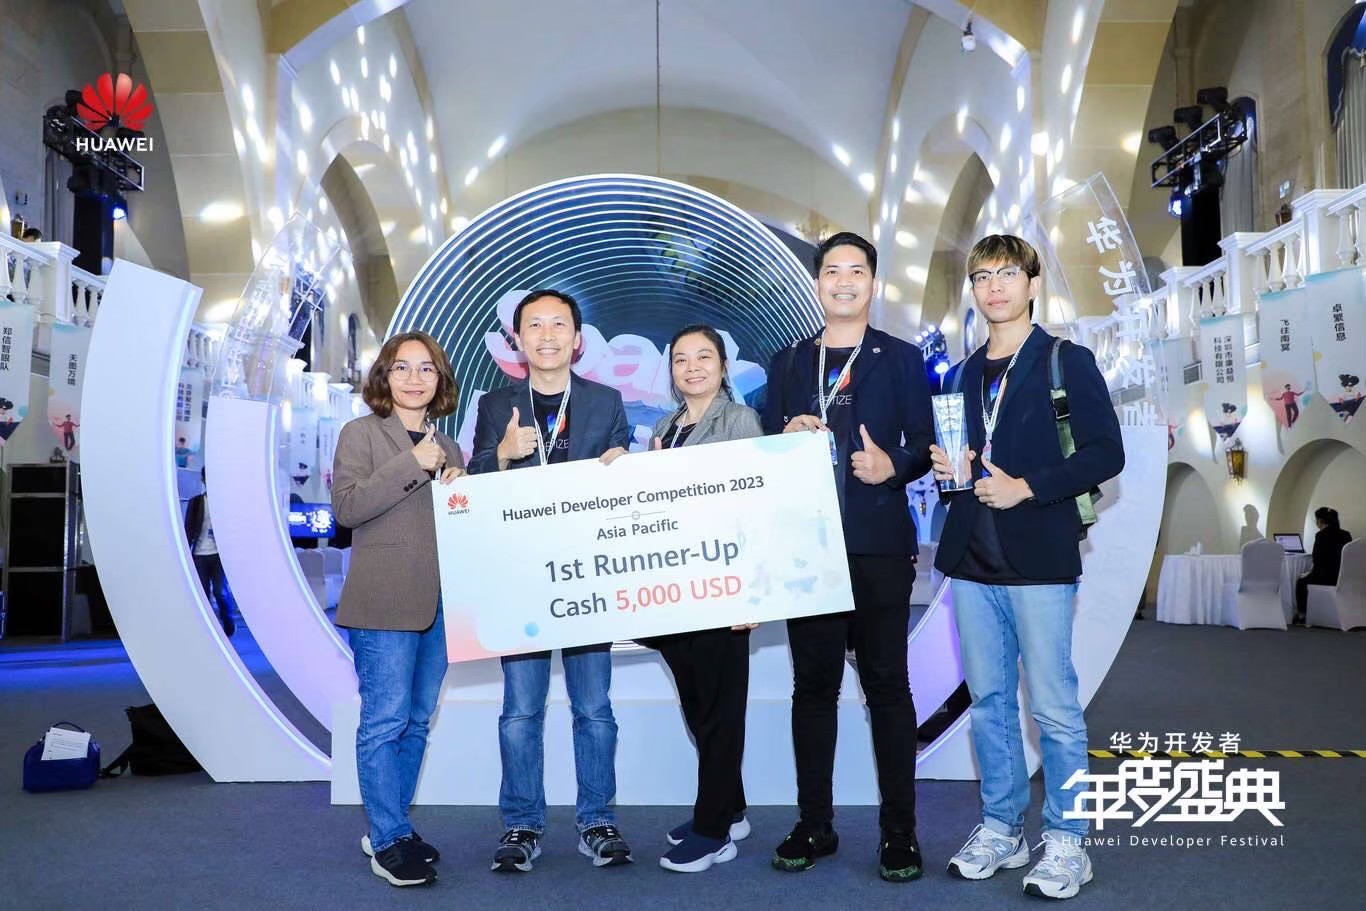 Netizen won The 1st Runner-Up Award at the Huawei Developer Competition 2023 (Asia Pacific)